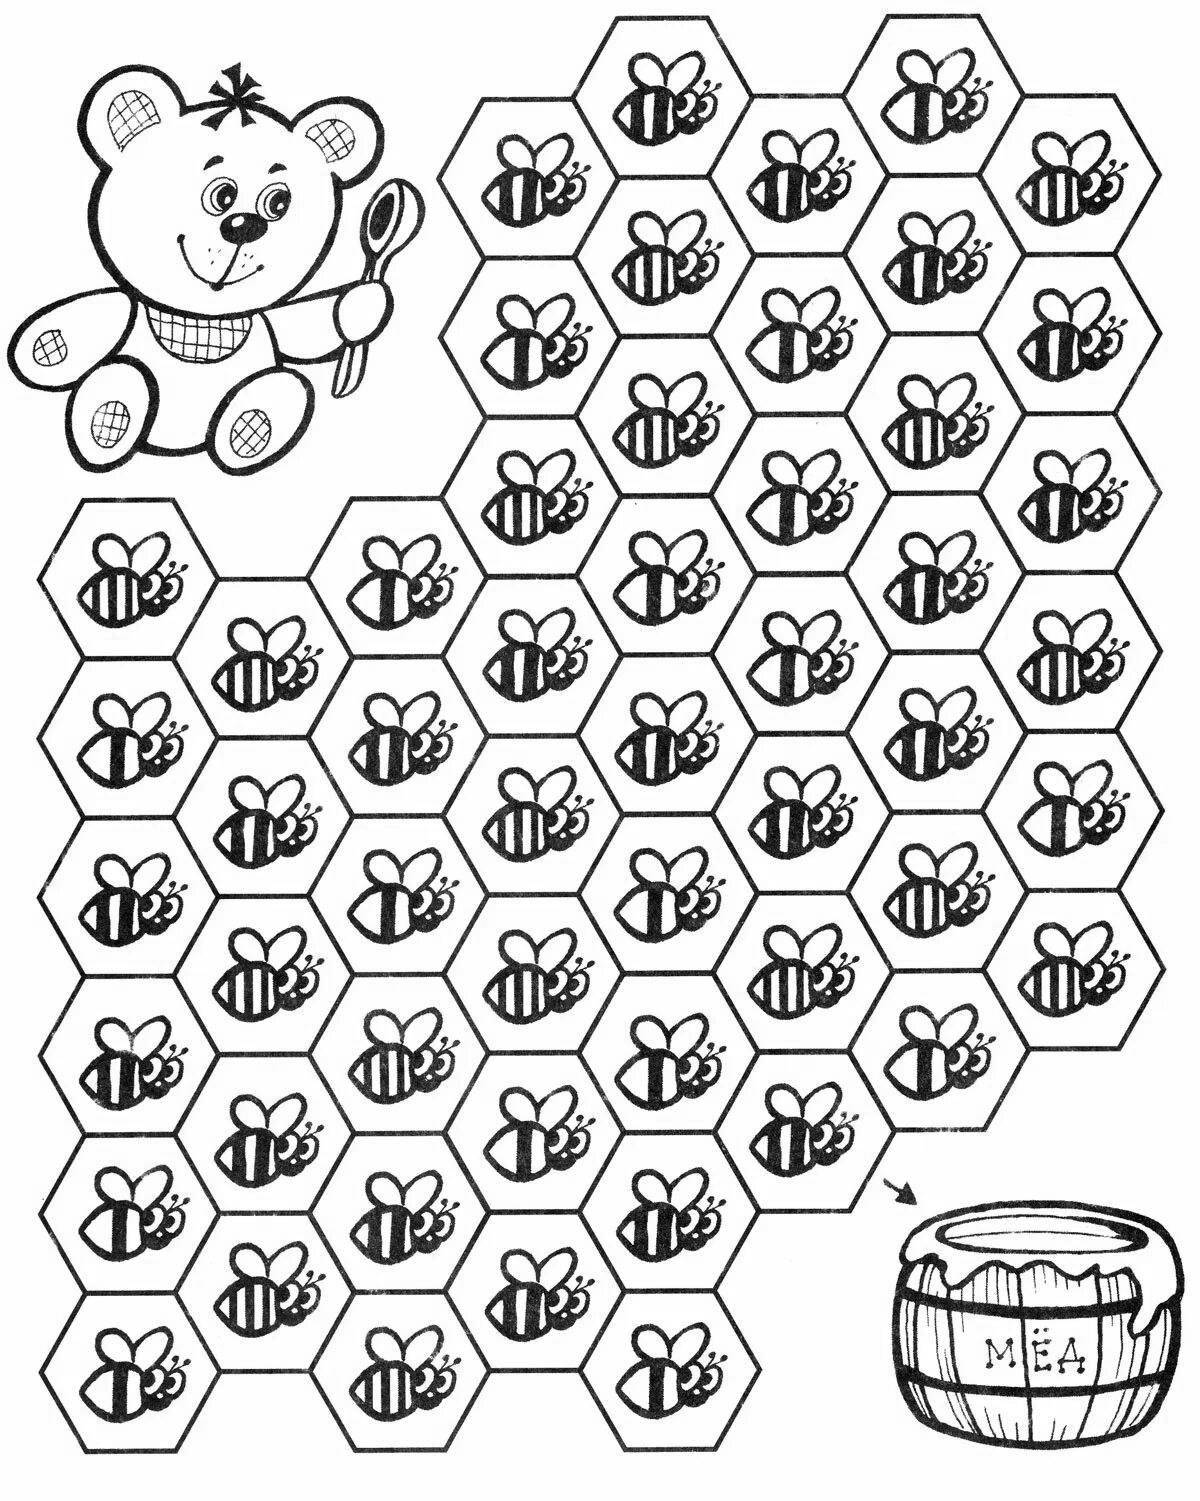 Great honeycomb coloring book for kids